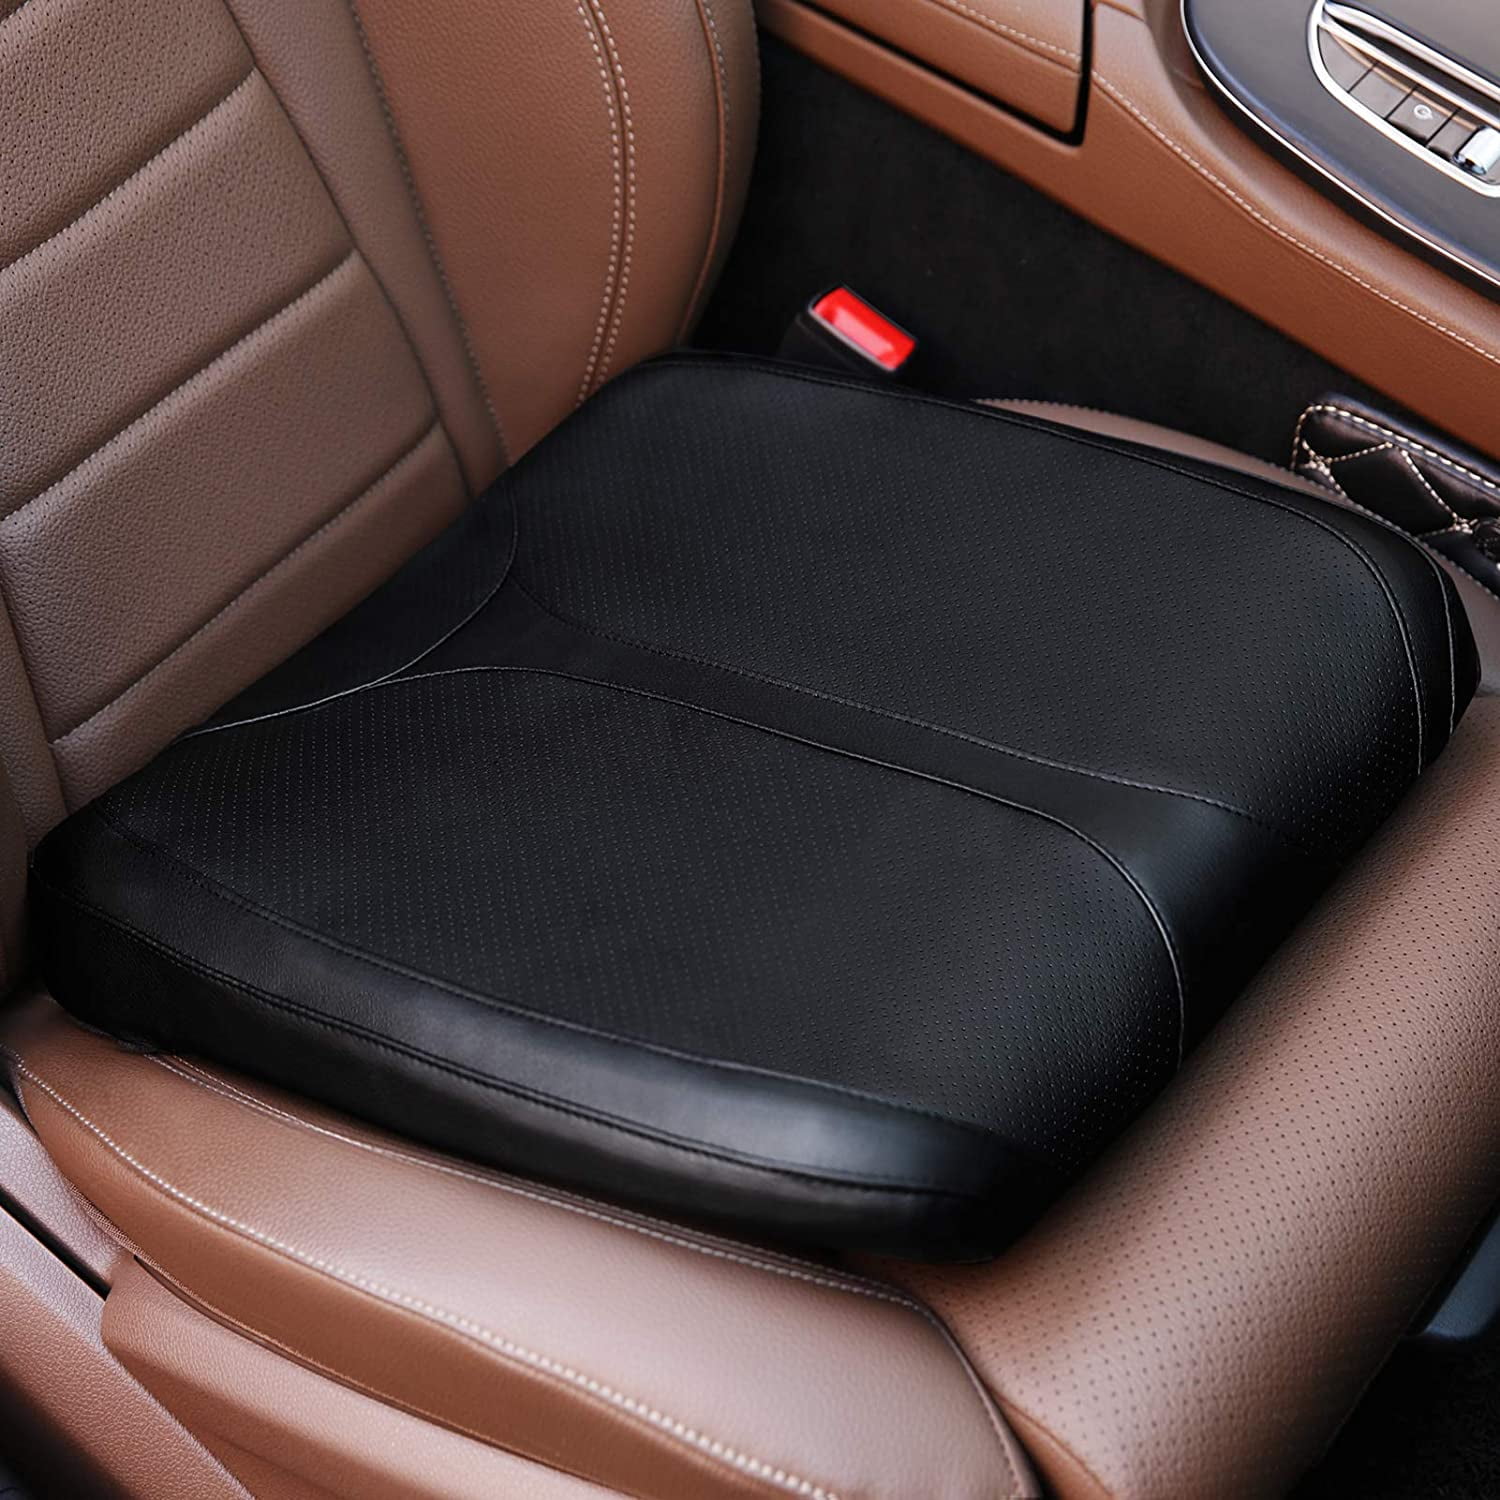 Cheap Car Coccyx Seat Cushion Pad For Sciatica Tailbone Pain Relief  Heightening Wedge Booster Seat Cushion For Short People Driving Truck Driver  For Office